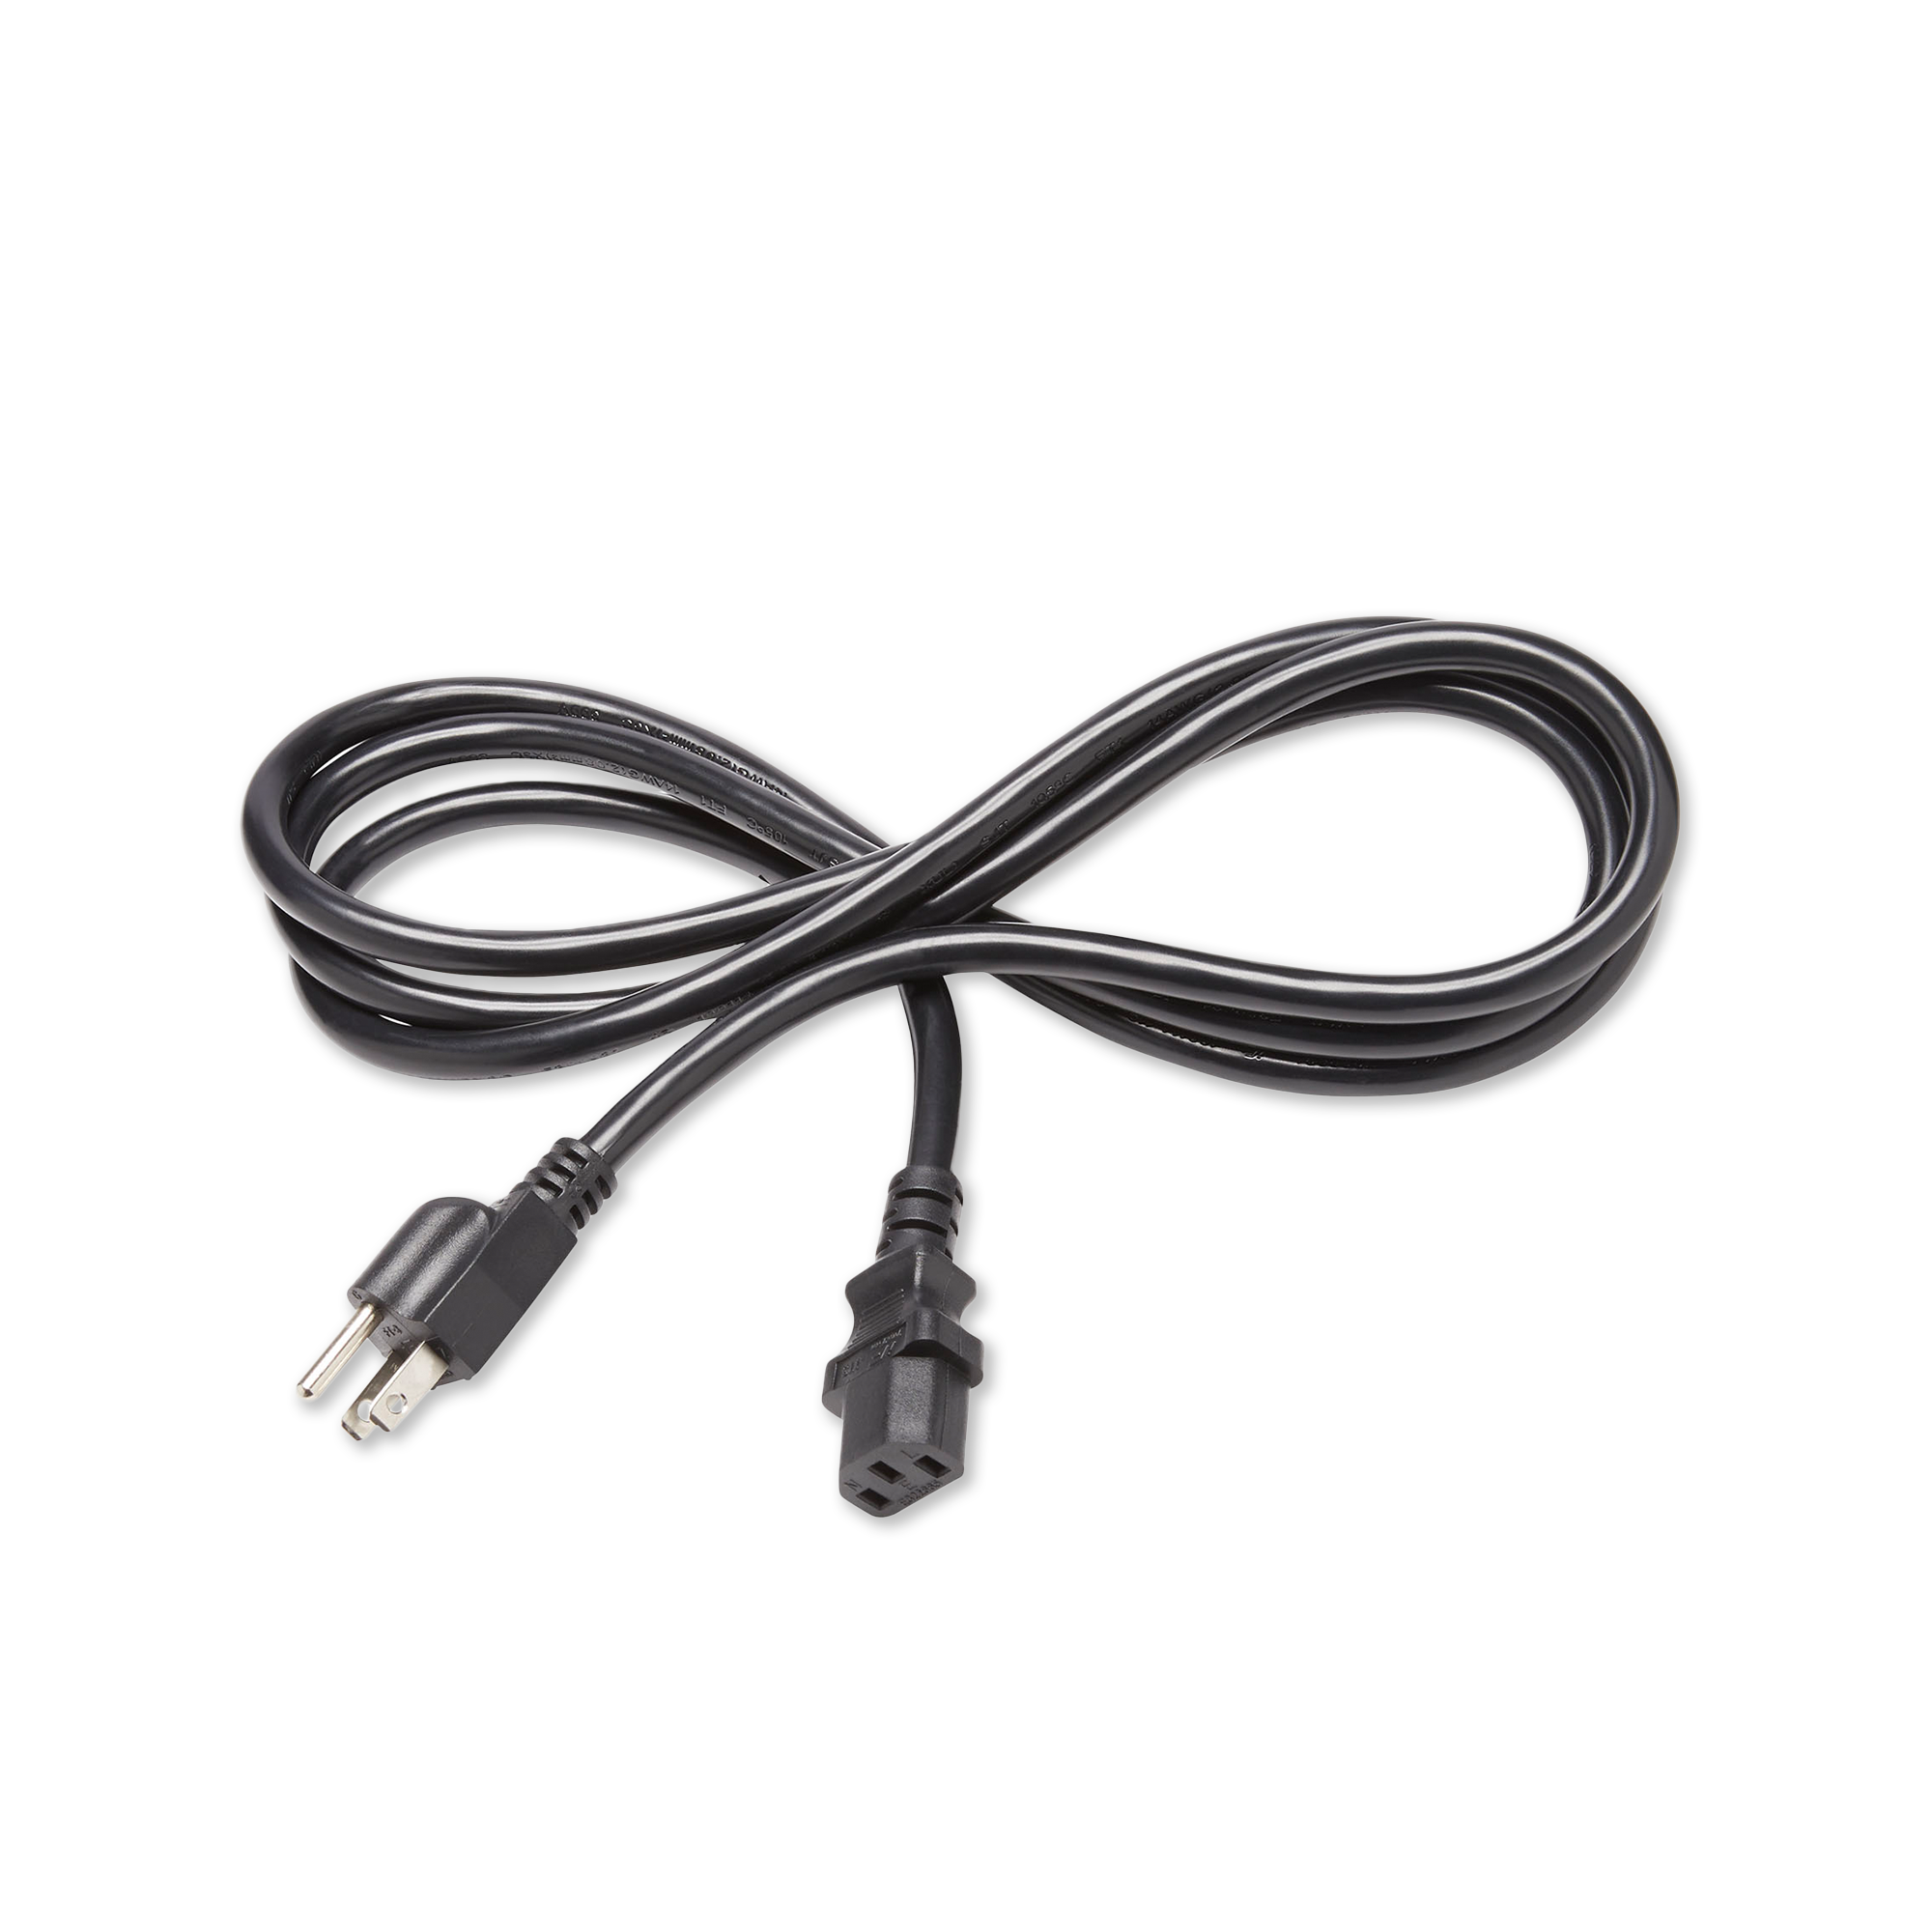 ICON Health & Fitness Treadmill Power Cord 031229 for sale online Icon 14AWG/6 Ft 